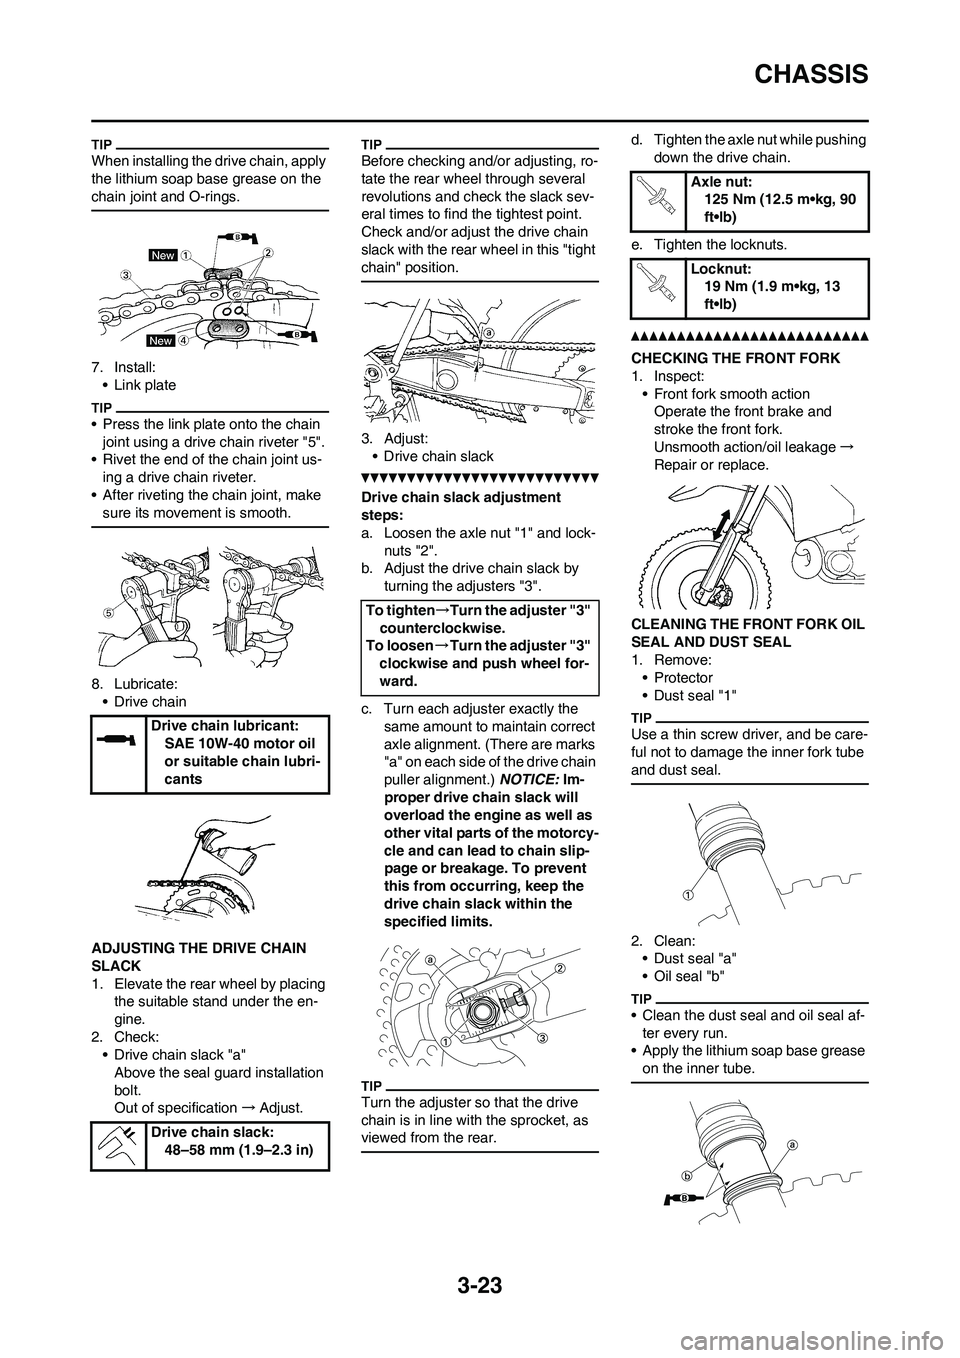 YAMAHA WR 450F 2010 Owners Manual 3-23
CHASSIS
When installing the drive chain, apply 
the lithium soap base grease on the 
chain joint and O-rings.
7. Install:
• Link plate
• Press the link plate onto the chain 
joint using a dri